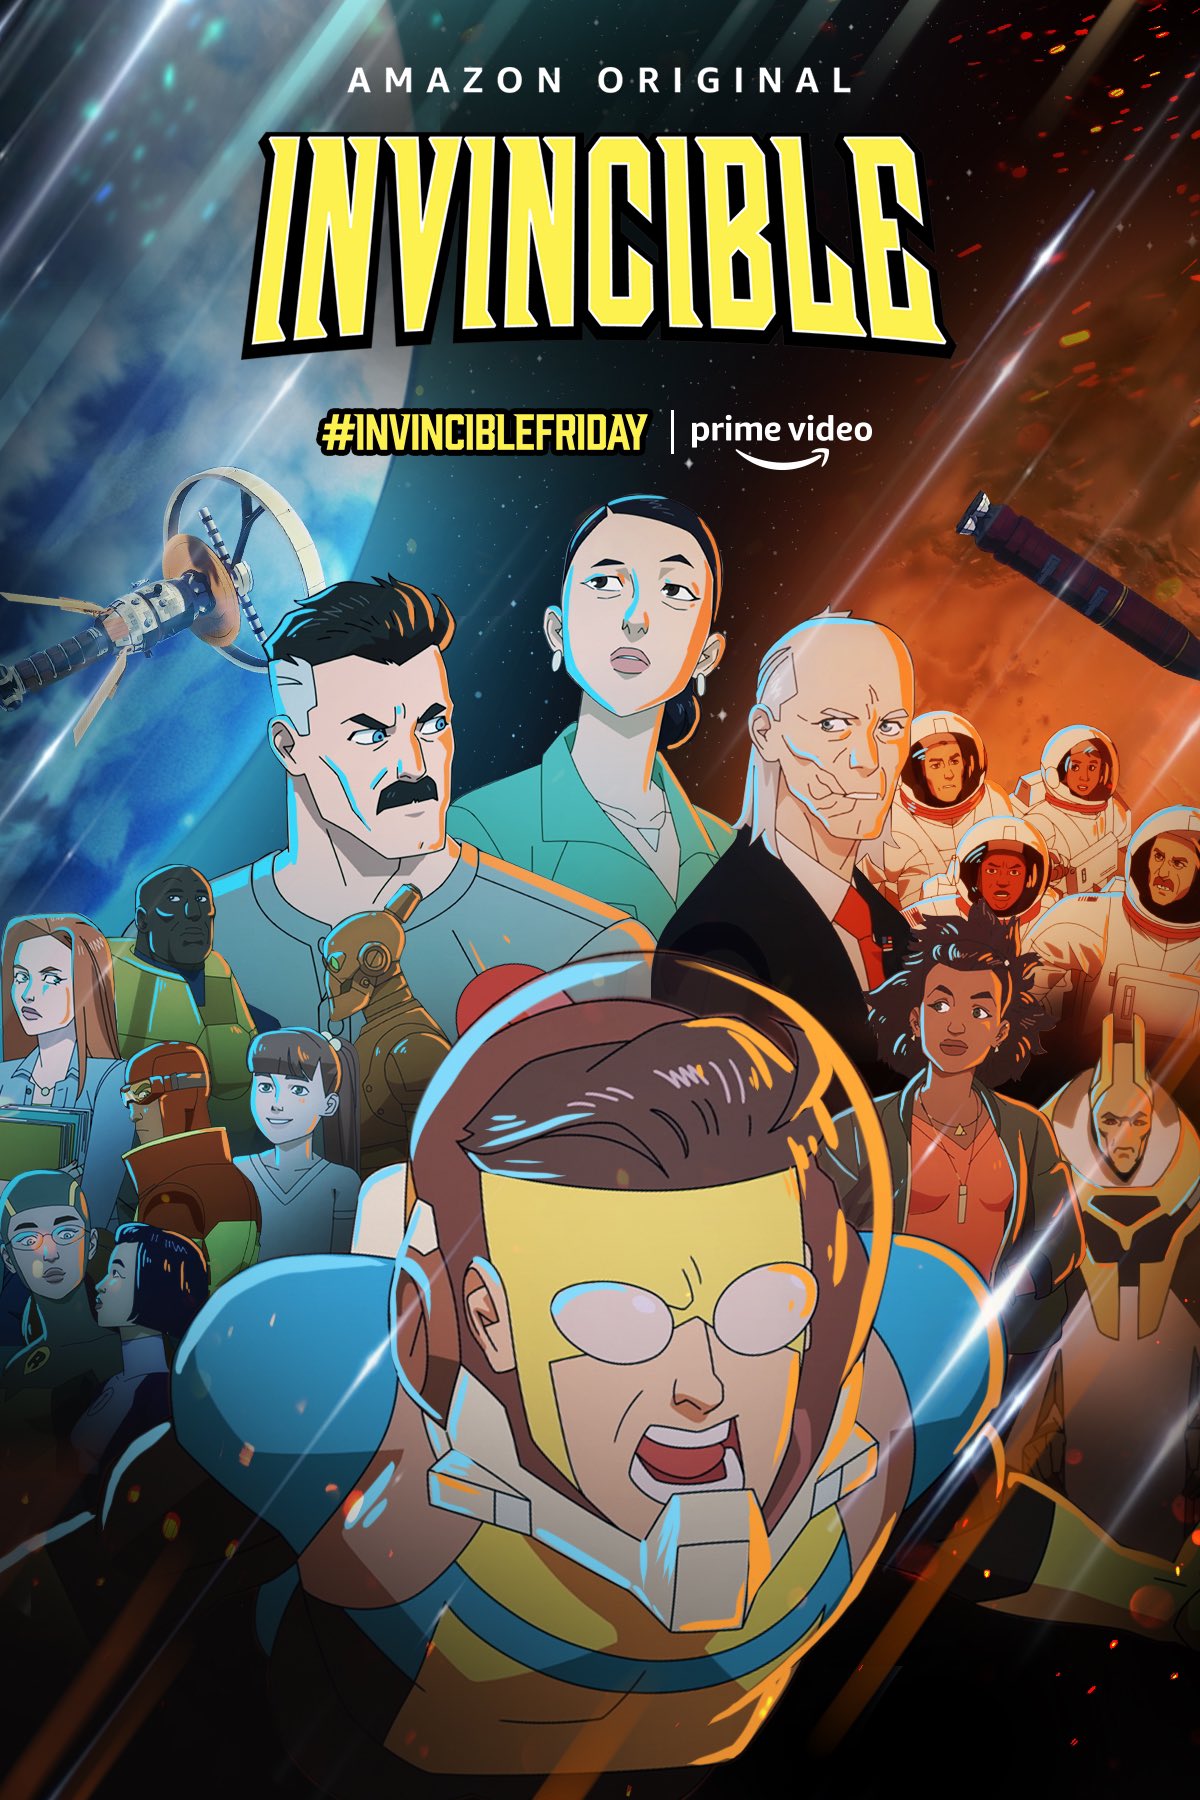 INVINCIBLE on X: New episode!!!! We're sure it will end well with no one  getting hurt. #InvincibleFriday  / X